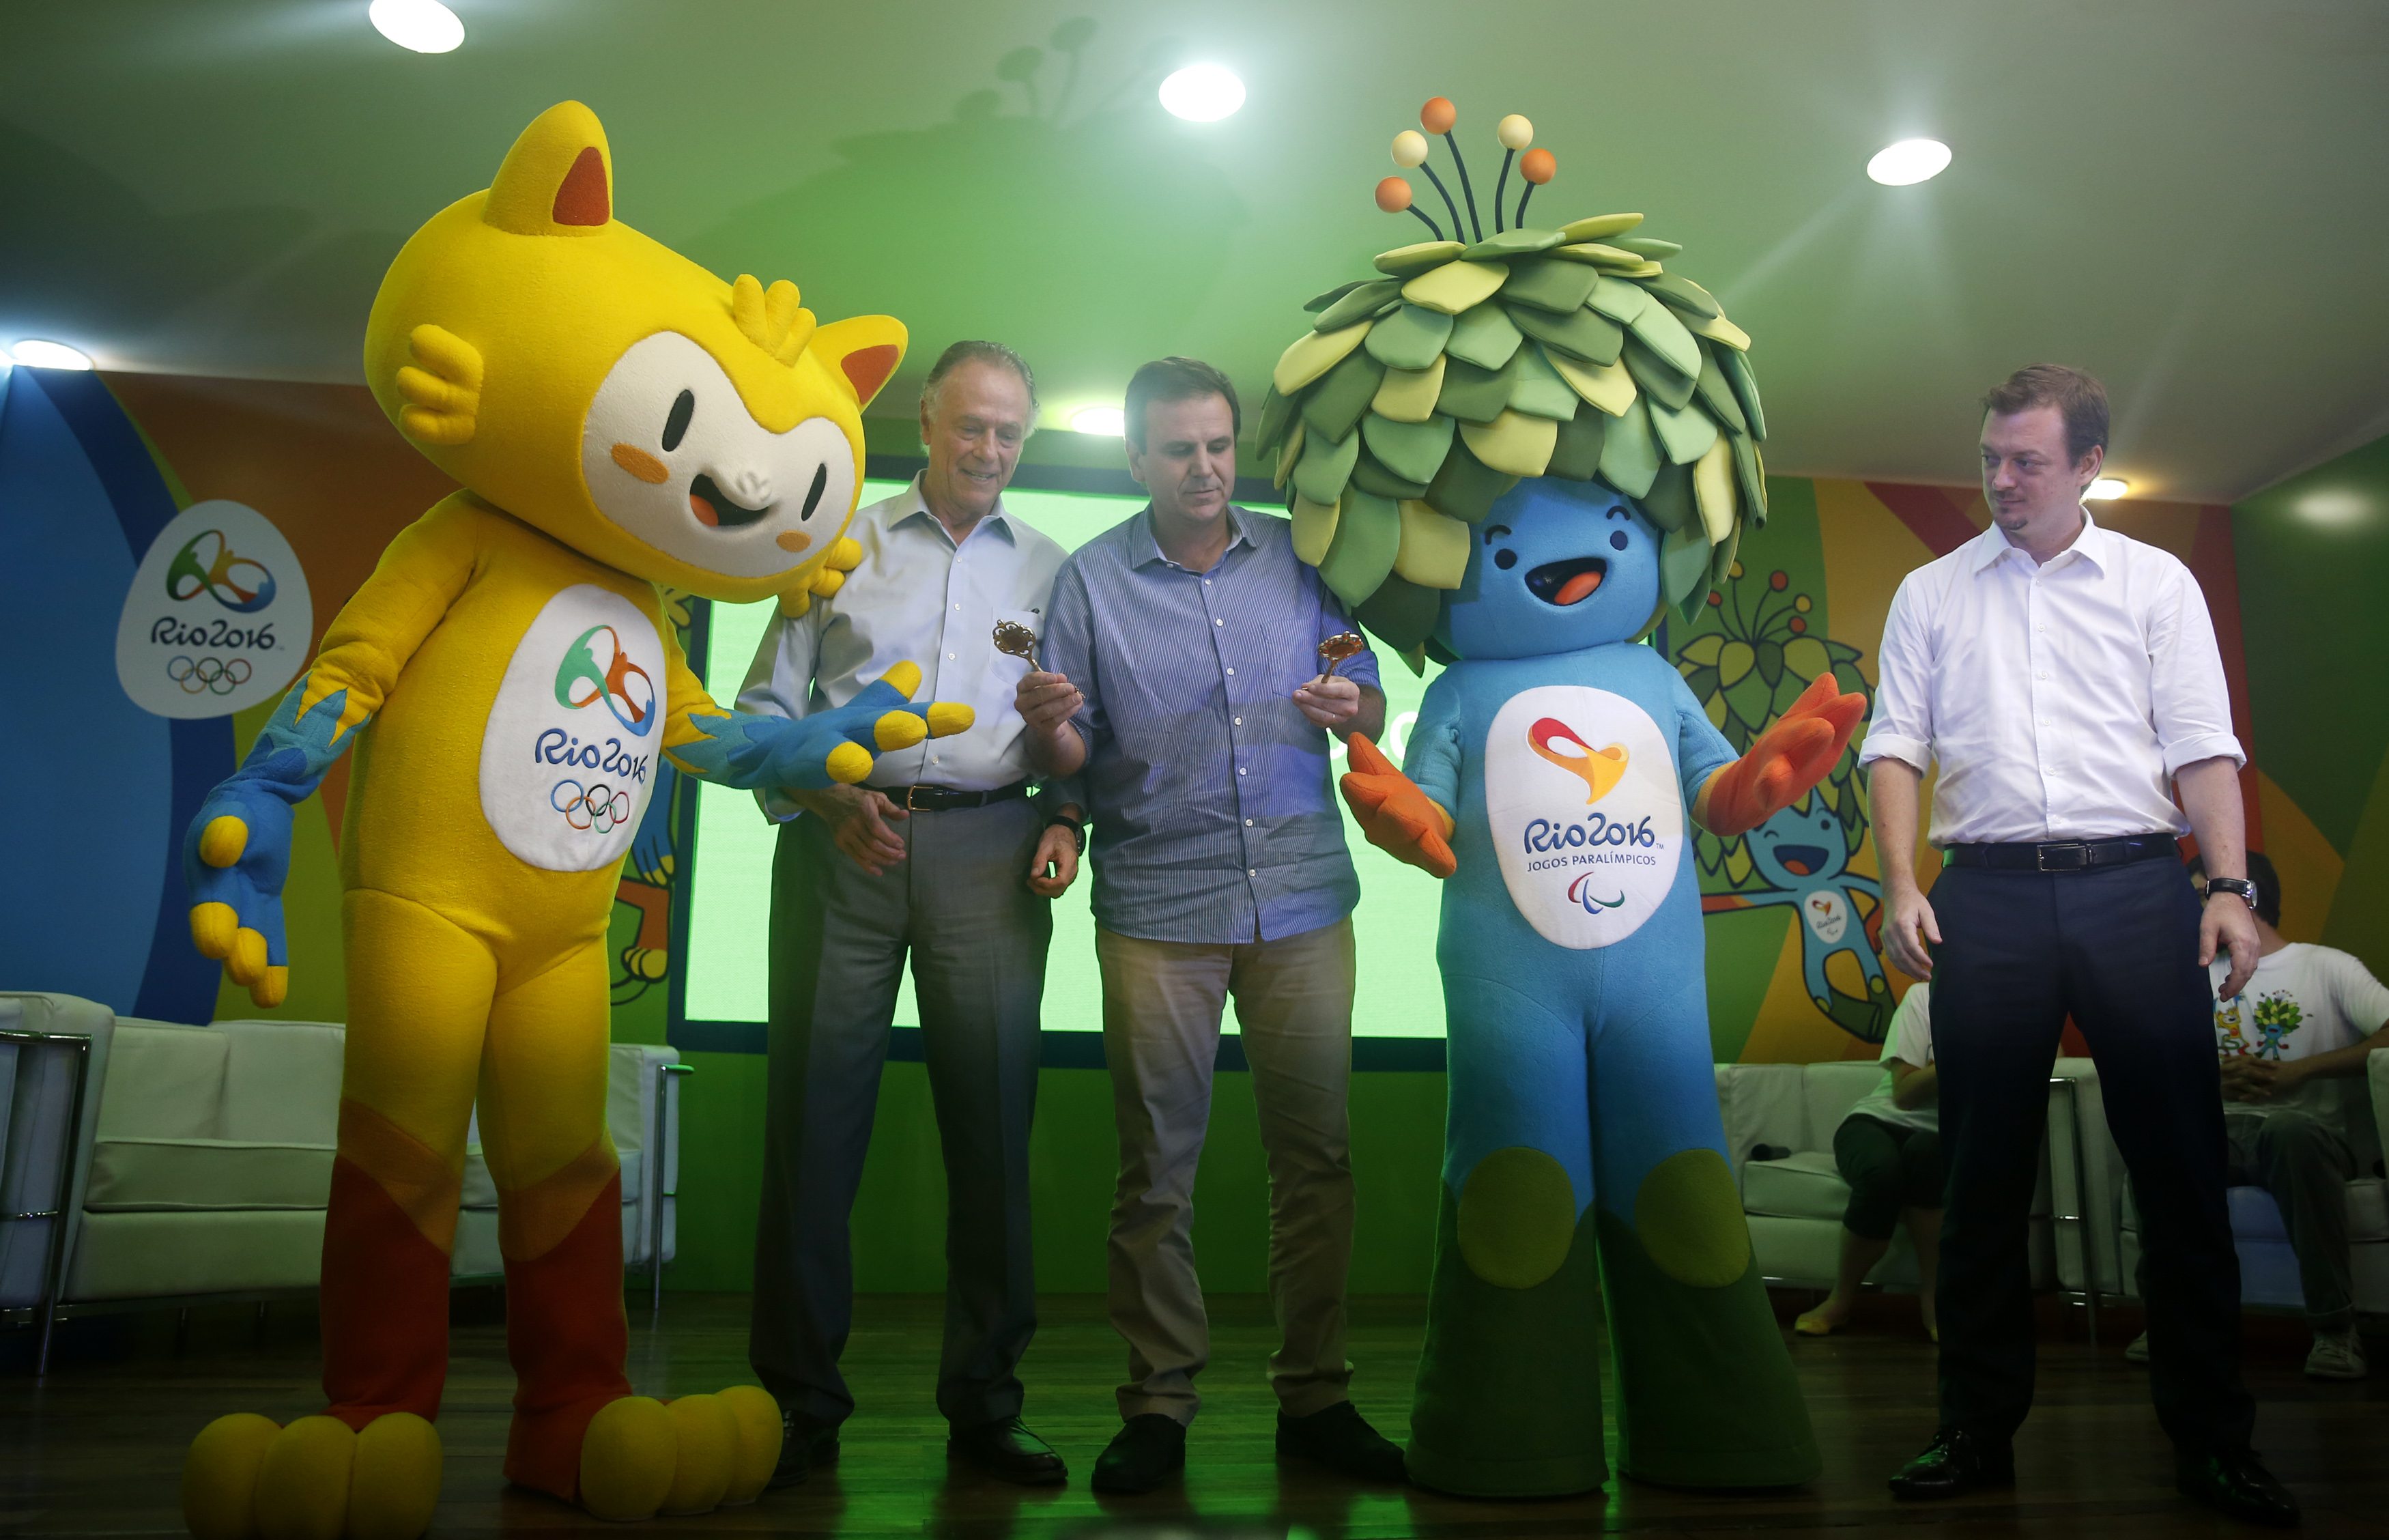 Eduardo Paes (C), the mayor of Rio de Janeiro gives the keys of the city to mascots of the Rio 2016 Olympic and Paralympic Games, accompanied by the President of the Brazilian Olympic Committee and head of the Rio 2016 Olympic Games Carlos Nuzman (2nd L) and President of the Brazilian Paralympic Committee Andrew Parsons. (Photo: REUTERS/Pilar Olivares)